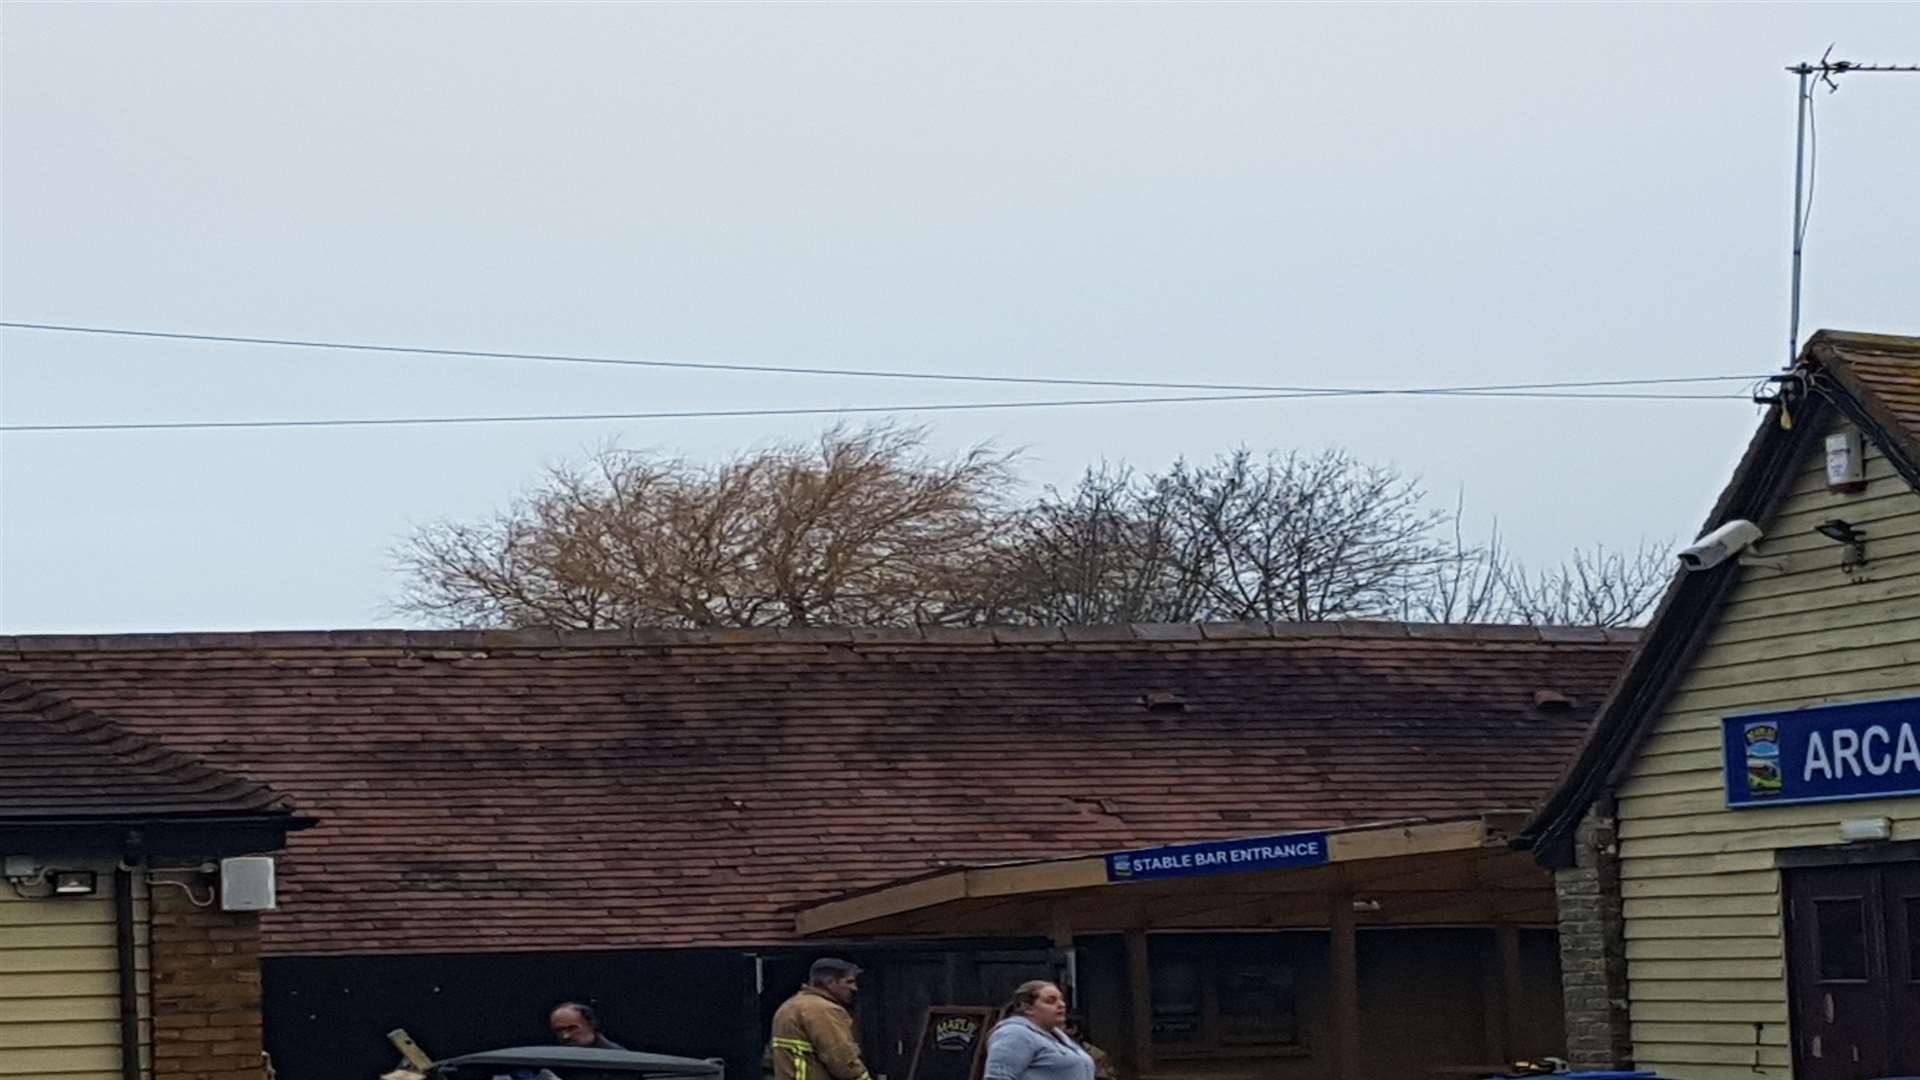 The roof was damaged in the fire